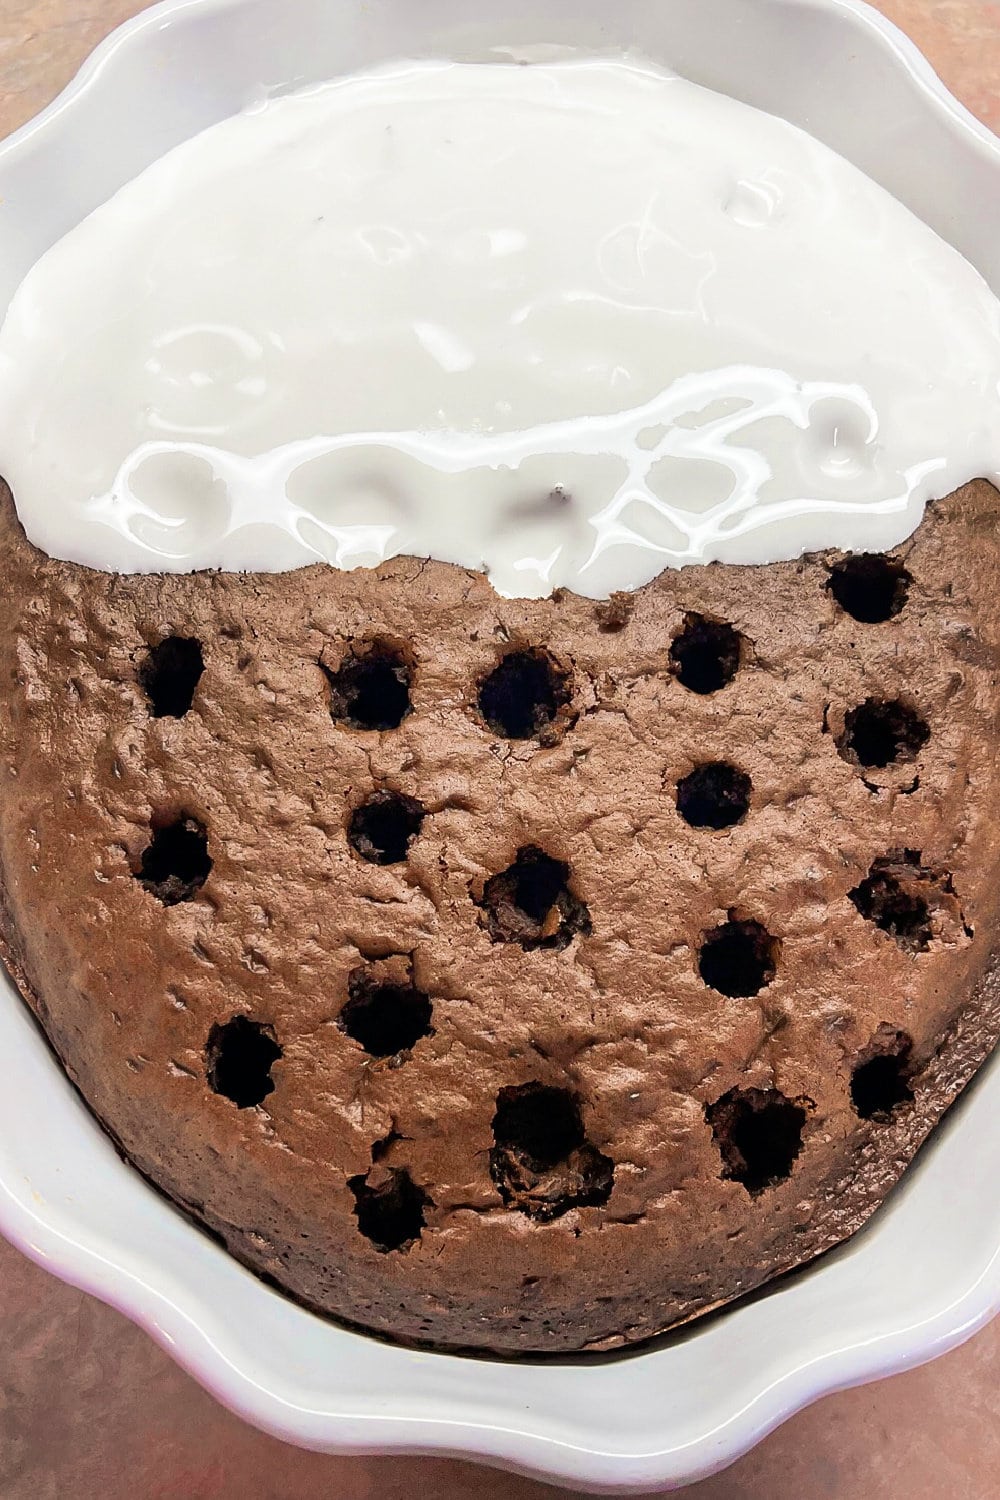 Chocolate cake with holes over the surface and marshmallow fluff. 